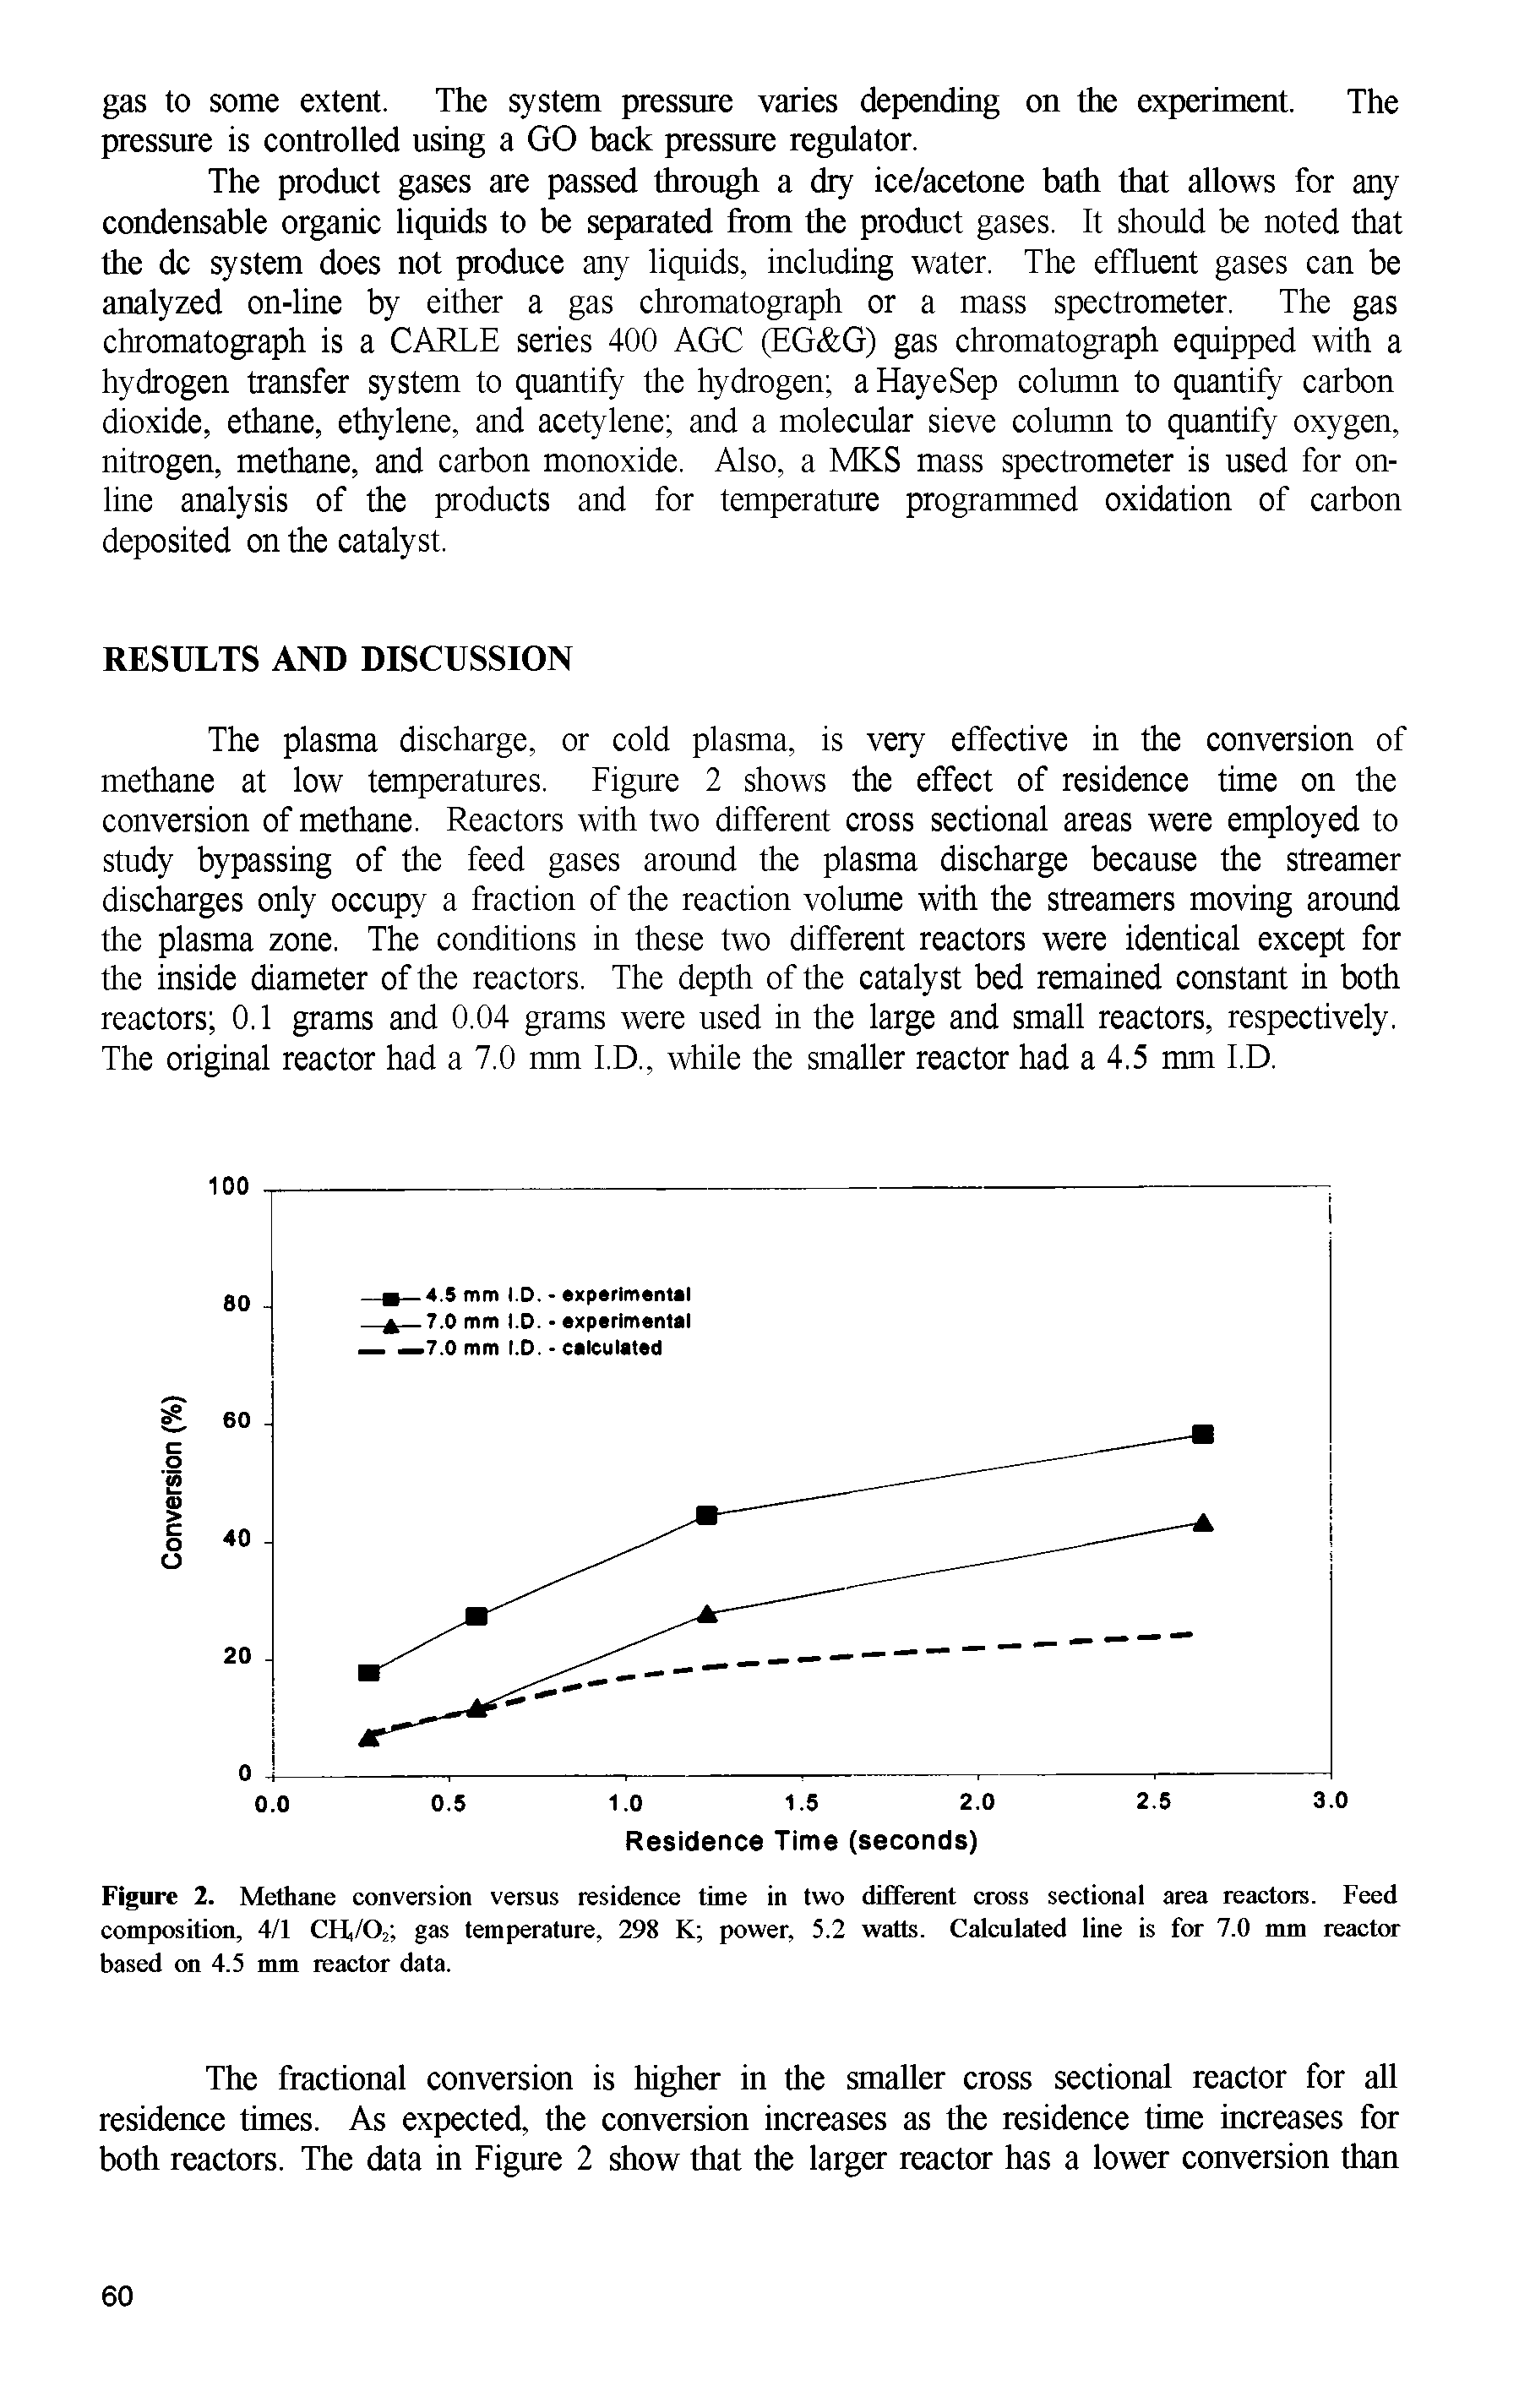 Figure 2. Methane conversion versus residence time in two different cross sectional area reactors. Feed composition, 4/1 CH,/02 gas temperature, 298 K power, 5.2 watts. Calculated line is for 7.0 mm reactor based on 4.5 mm reactor data.